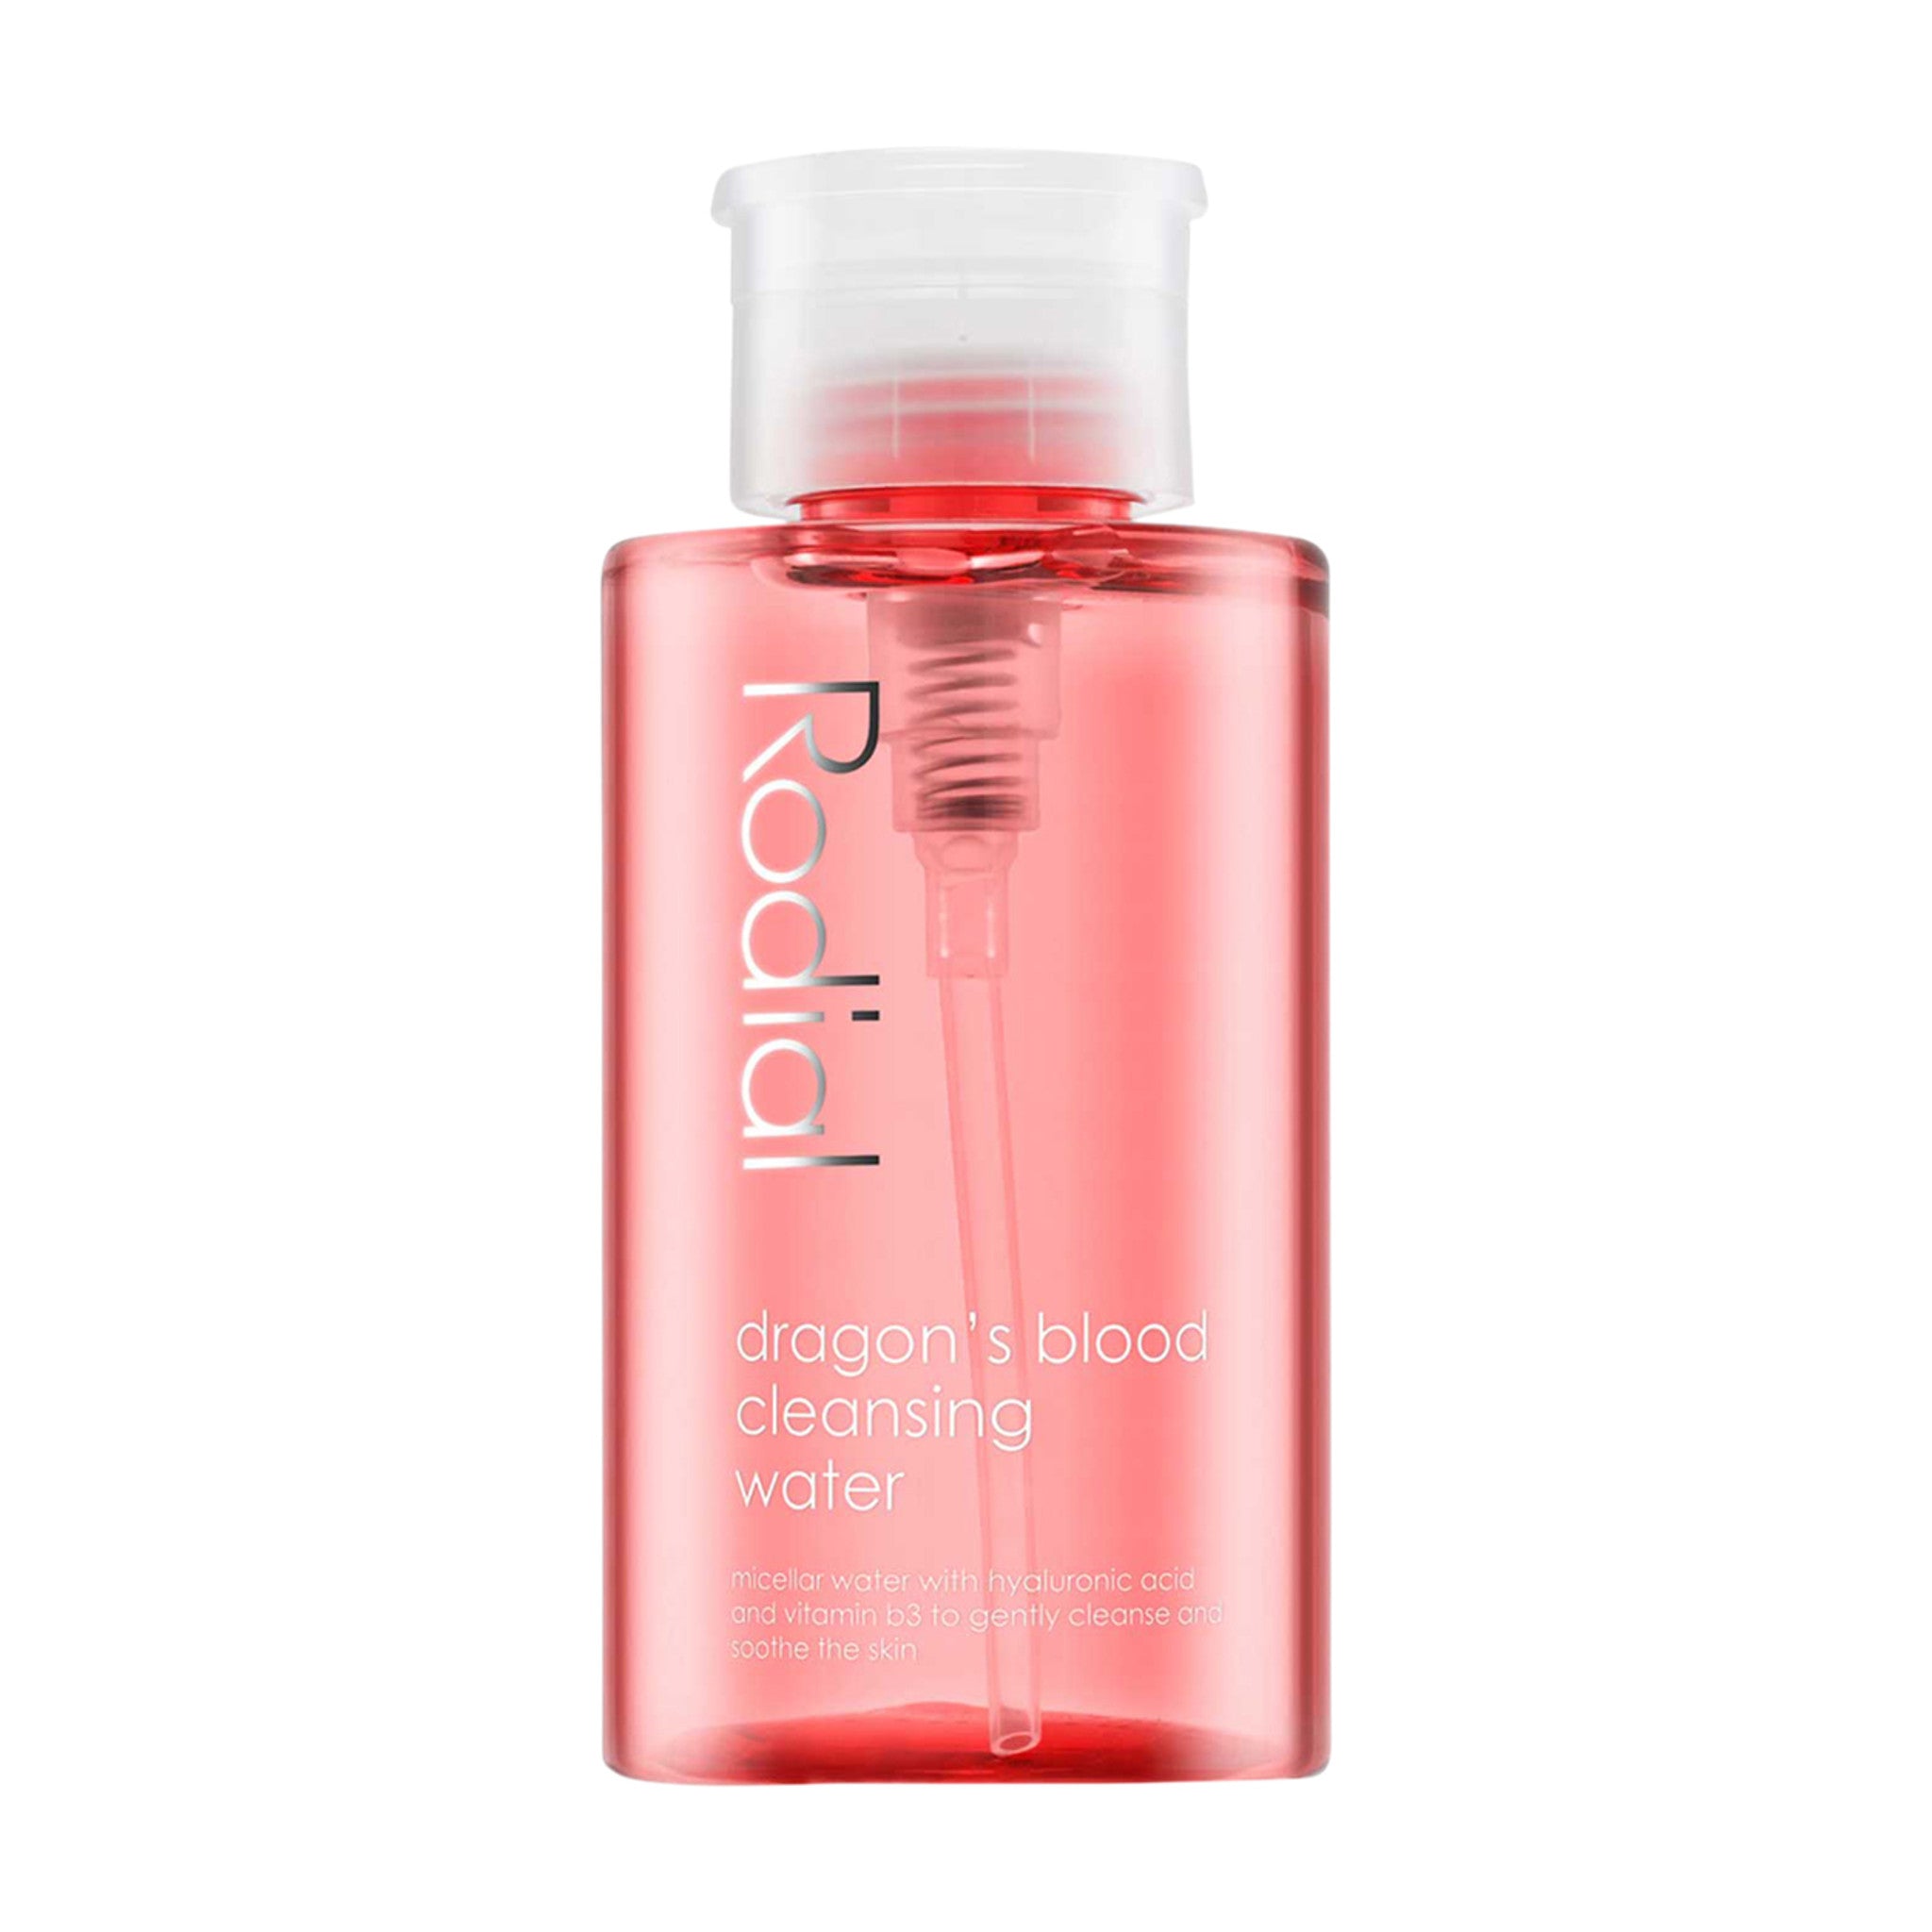 Rodial Dragons Blood Cleansing Water main image.